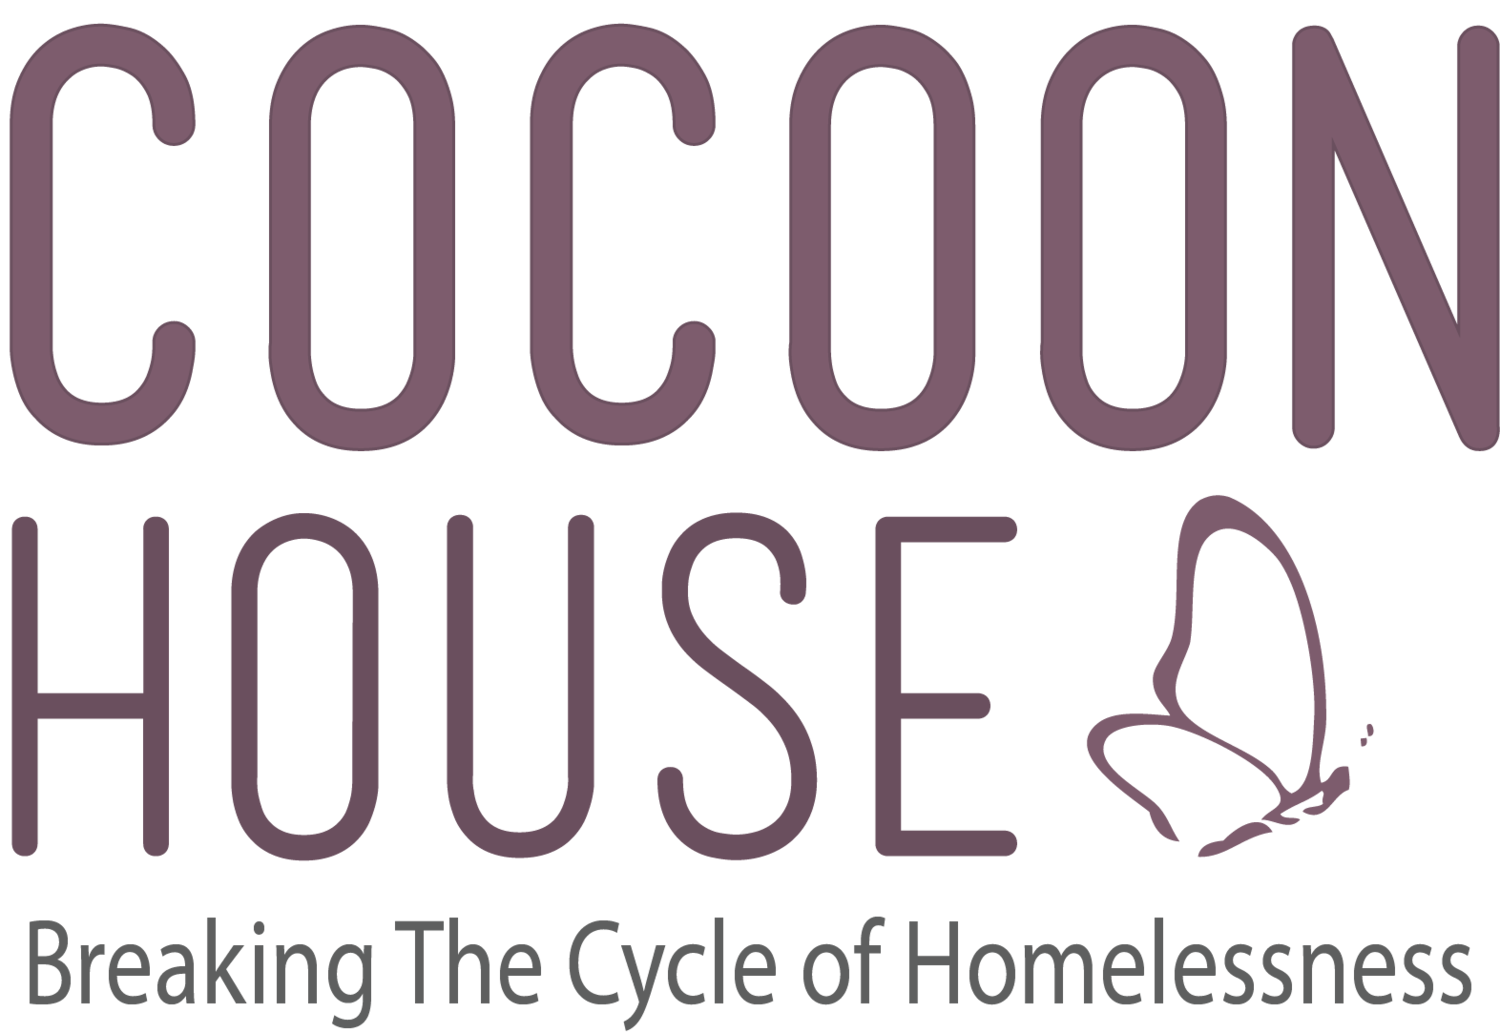 Cocoon House